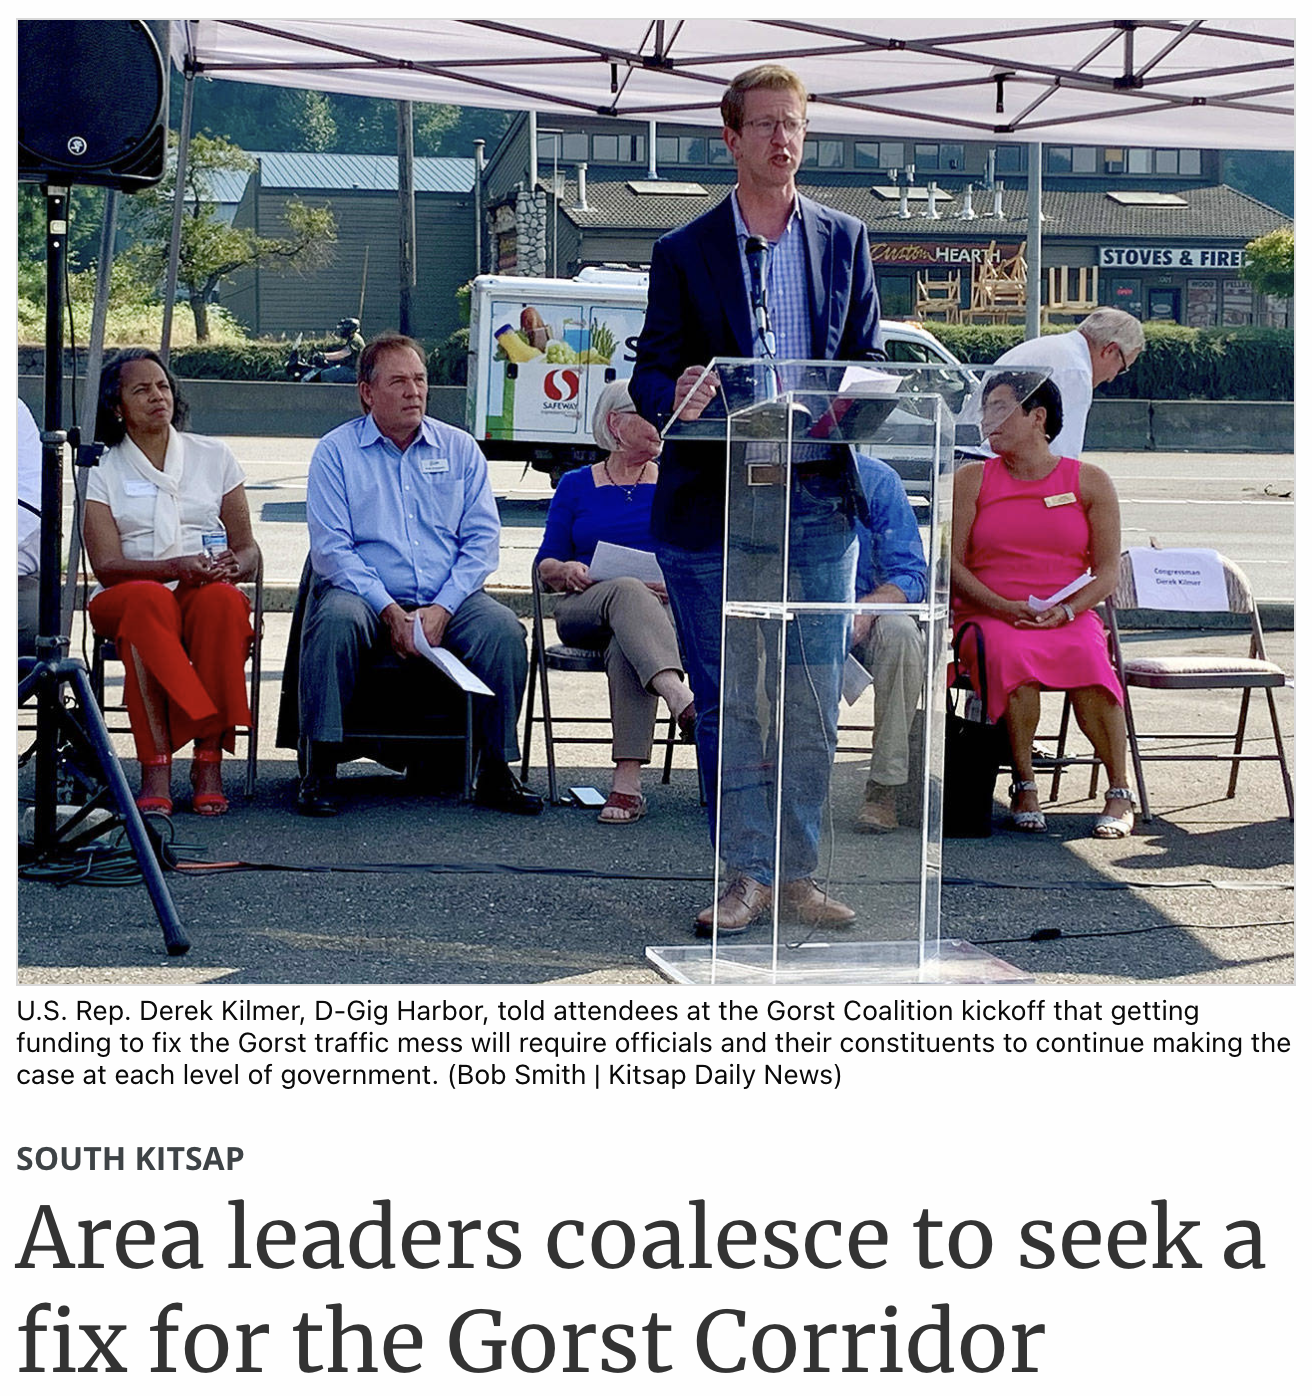 Kitsap Daily News - Area leaders coalesce to seek a fix for the Gorst Corridor